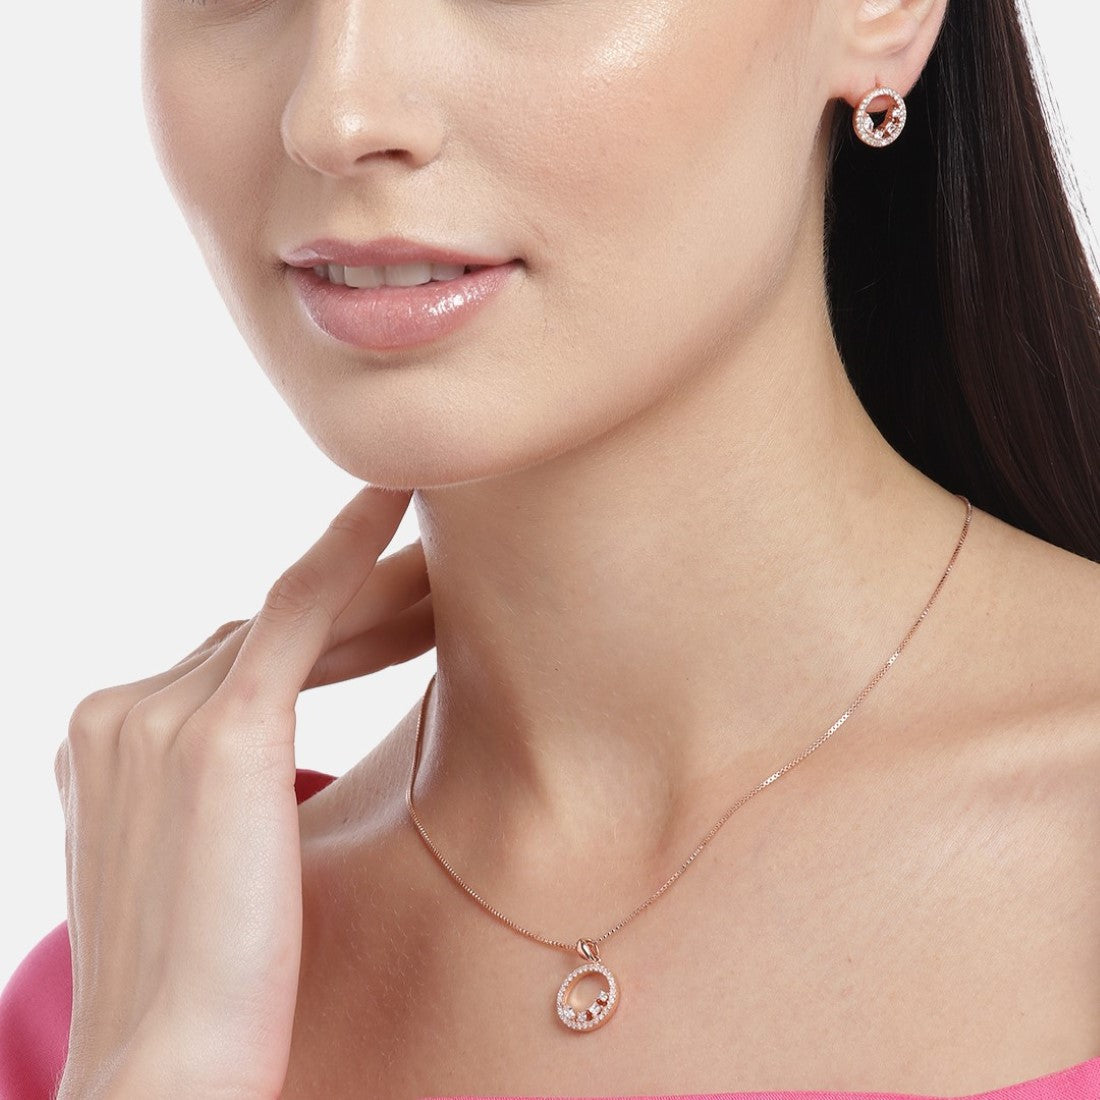 Celestial Circle of Elegance Rose Gold-Plated CZ 925 Sterling Silver Jewelry Set